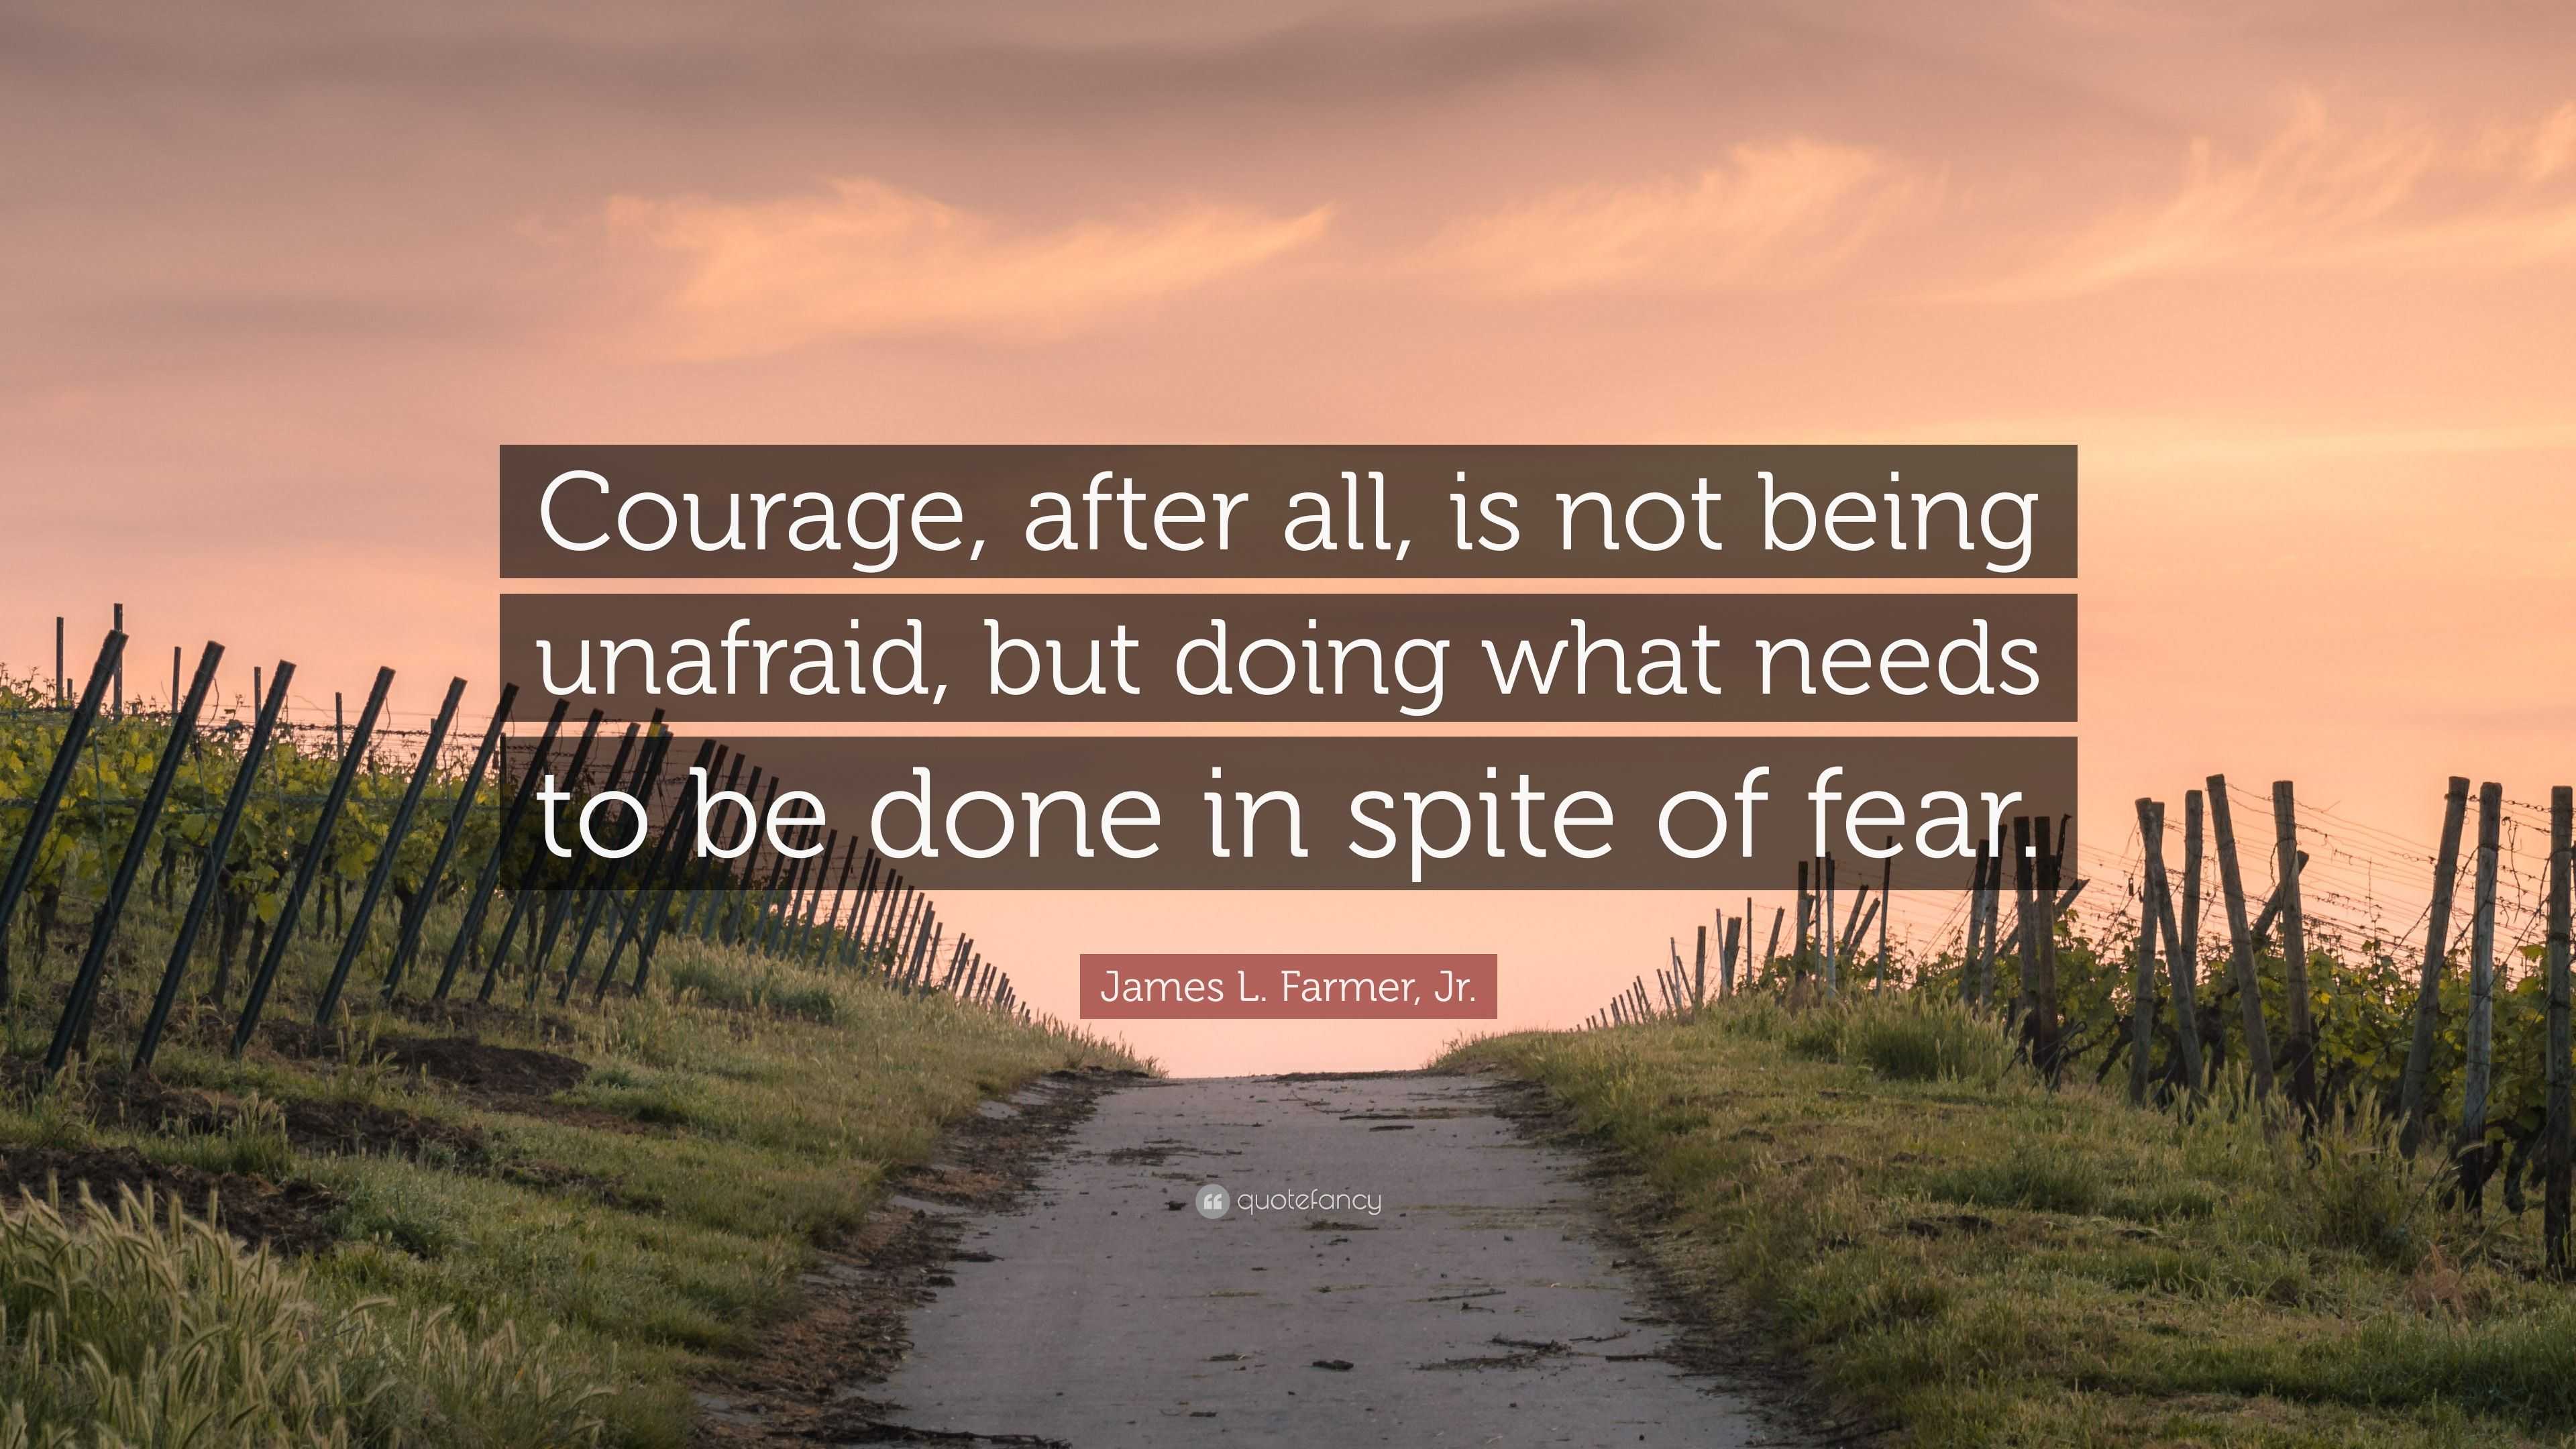 James L. Farmer, Jr. Quote: “Courage, after all, is not being unafraid